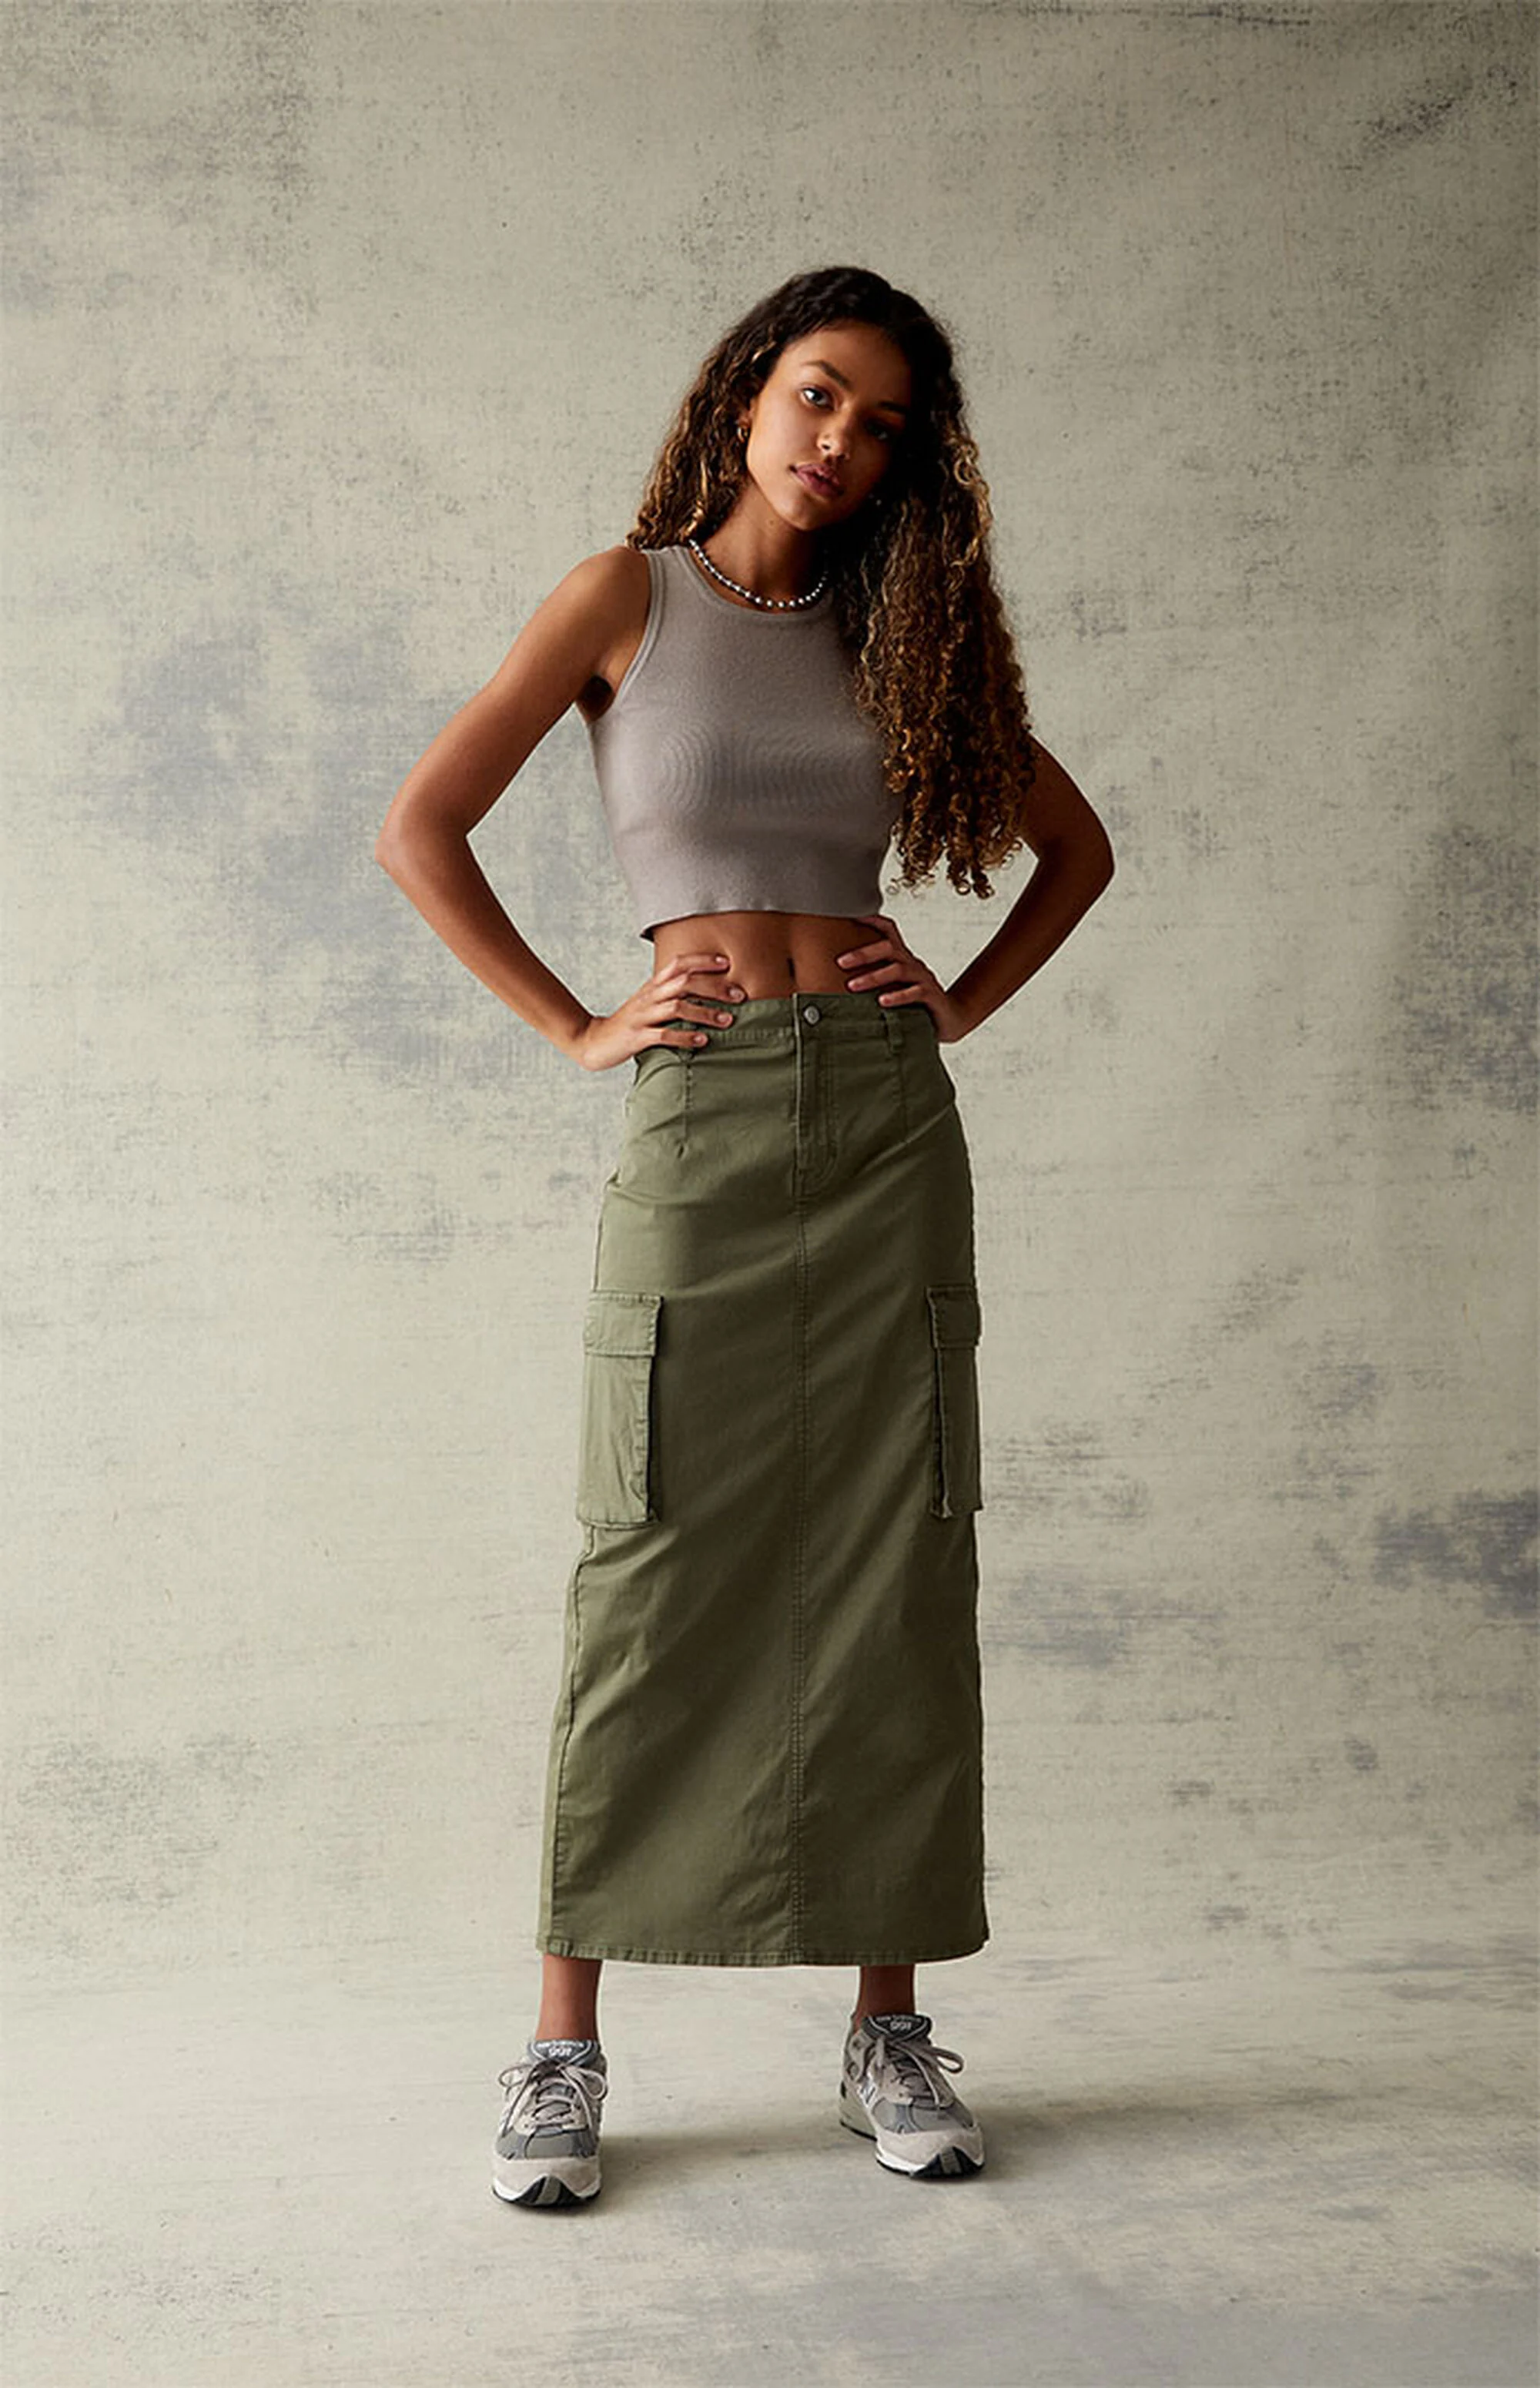 How to Wear Cargo Skirt: Best 15 Casual Outfit Ideas for Ladies